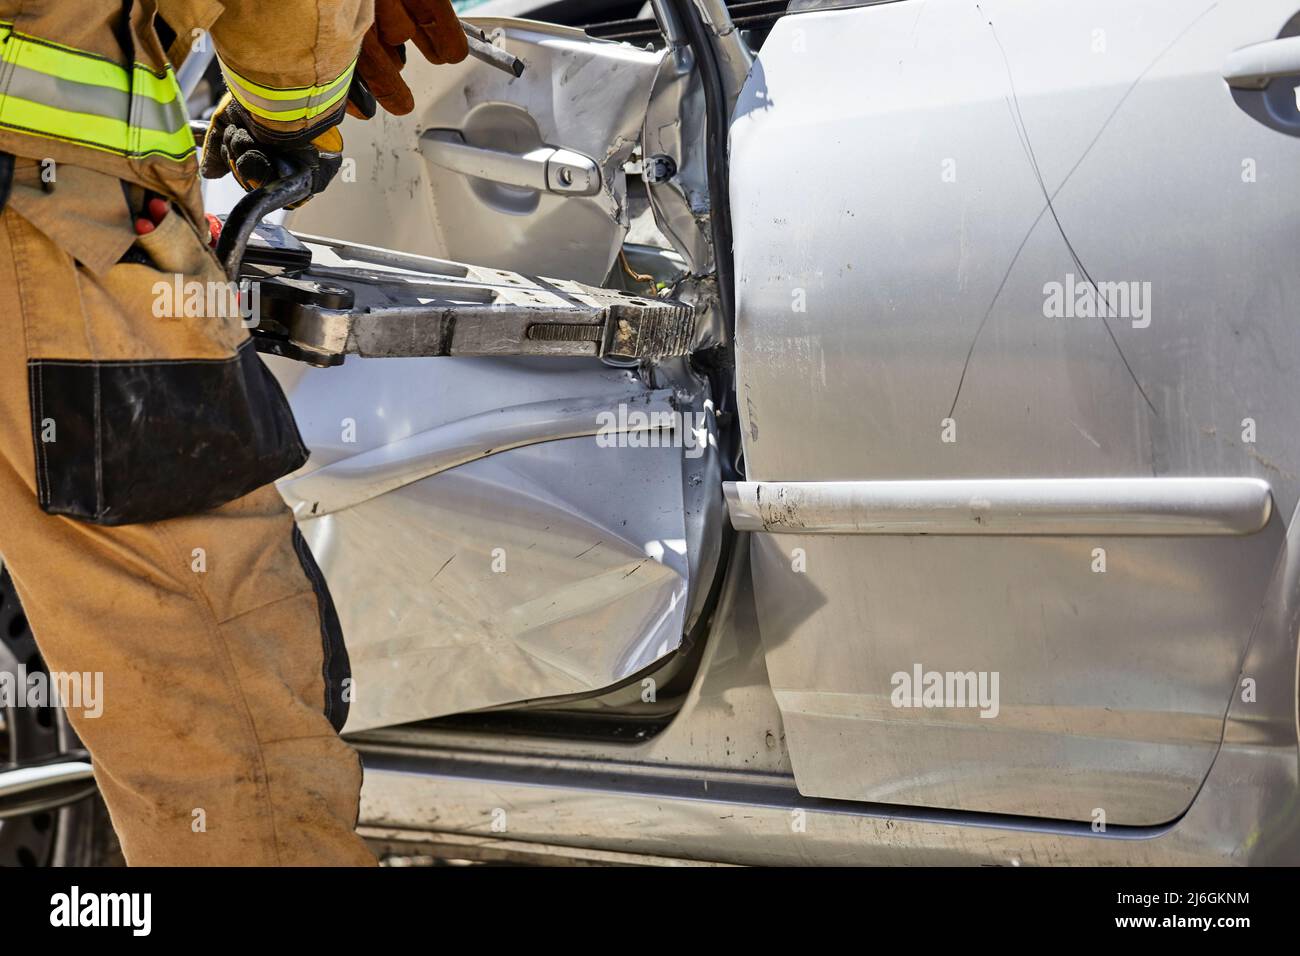 Fire Fighter using the jaws of life to remove the roof of a car in a demonstration Stock Photo